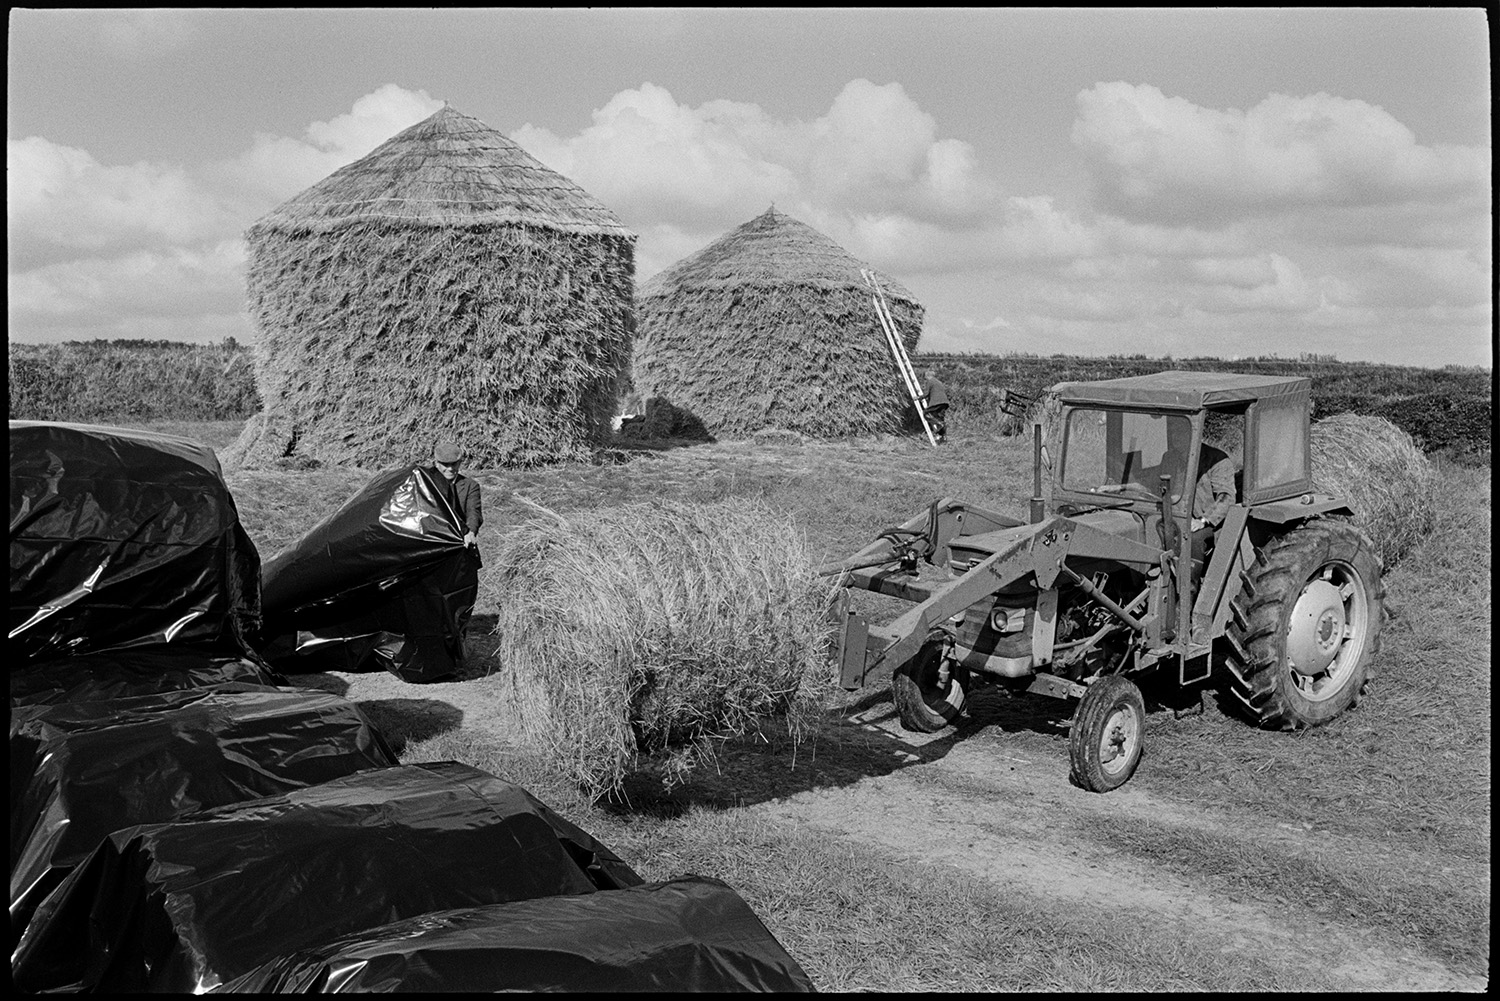 Farmer wrapping large round bales in polythene, round thatched wheatricks behind.
[Dudley Middleton  and another man wrapping hay bales in polythene in a field at Westacott, Riddlecombe. The bales are on a fork lift attached to a tractor. Two thatched wheat ricks are in the background and a ladder is propped against one of the ricks.]